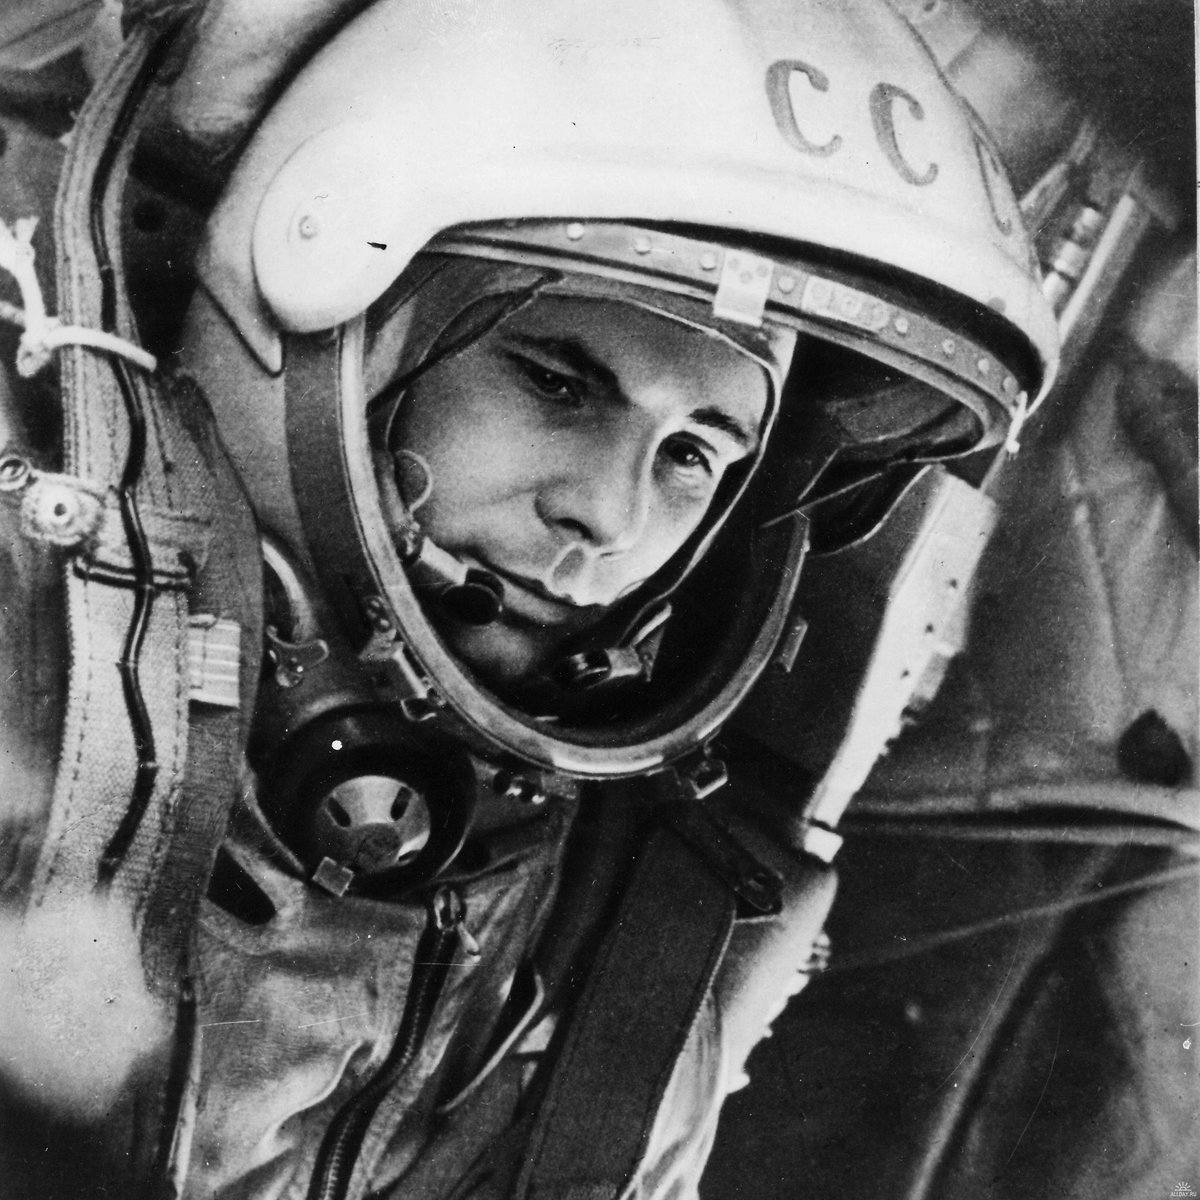 #OTD 12 April 1961, #YuriGagarin became the 1st person in space when he was launched in his #Vostok 1 spacecraft. See more esa.int/About_Us/Welco… #yurisnight #firstorbit #cosmonauticsday